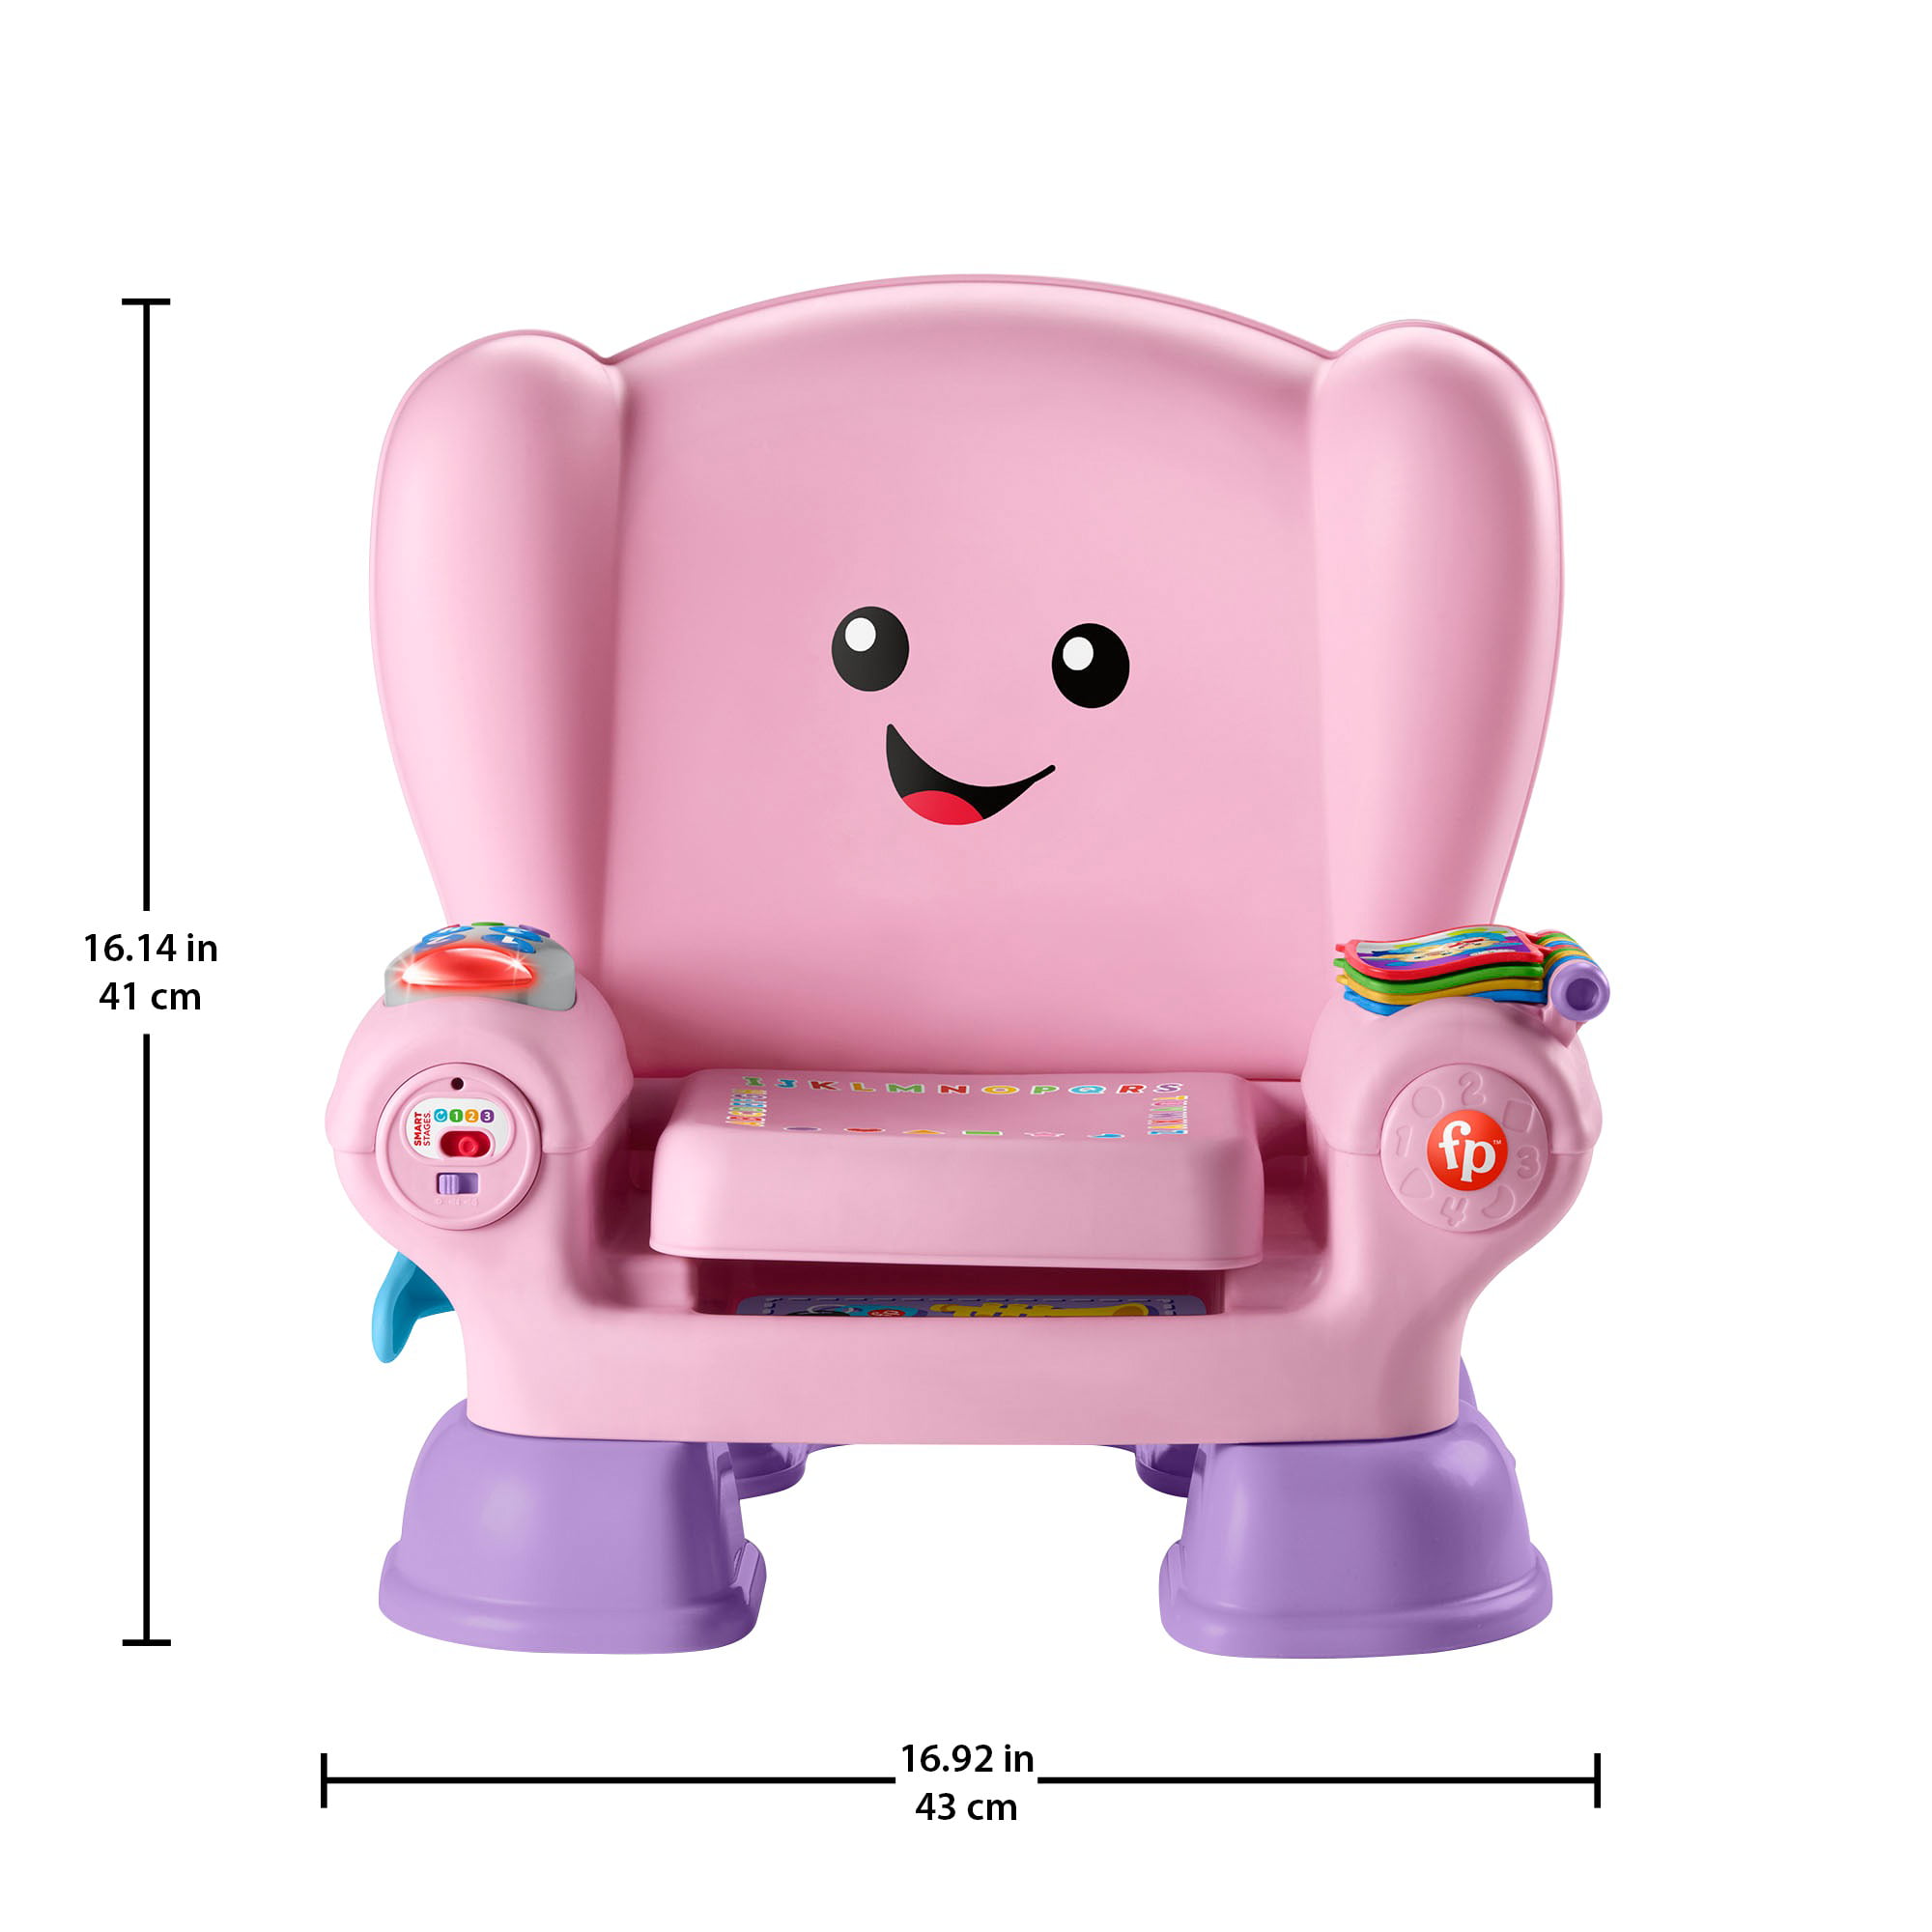 Fisher Price FISHER-PRICE LAUGH & LEARN SMART STAGES CHAIR PINK Toy BN 